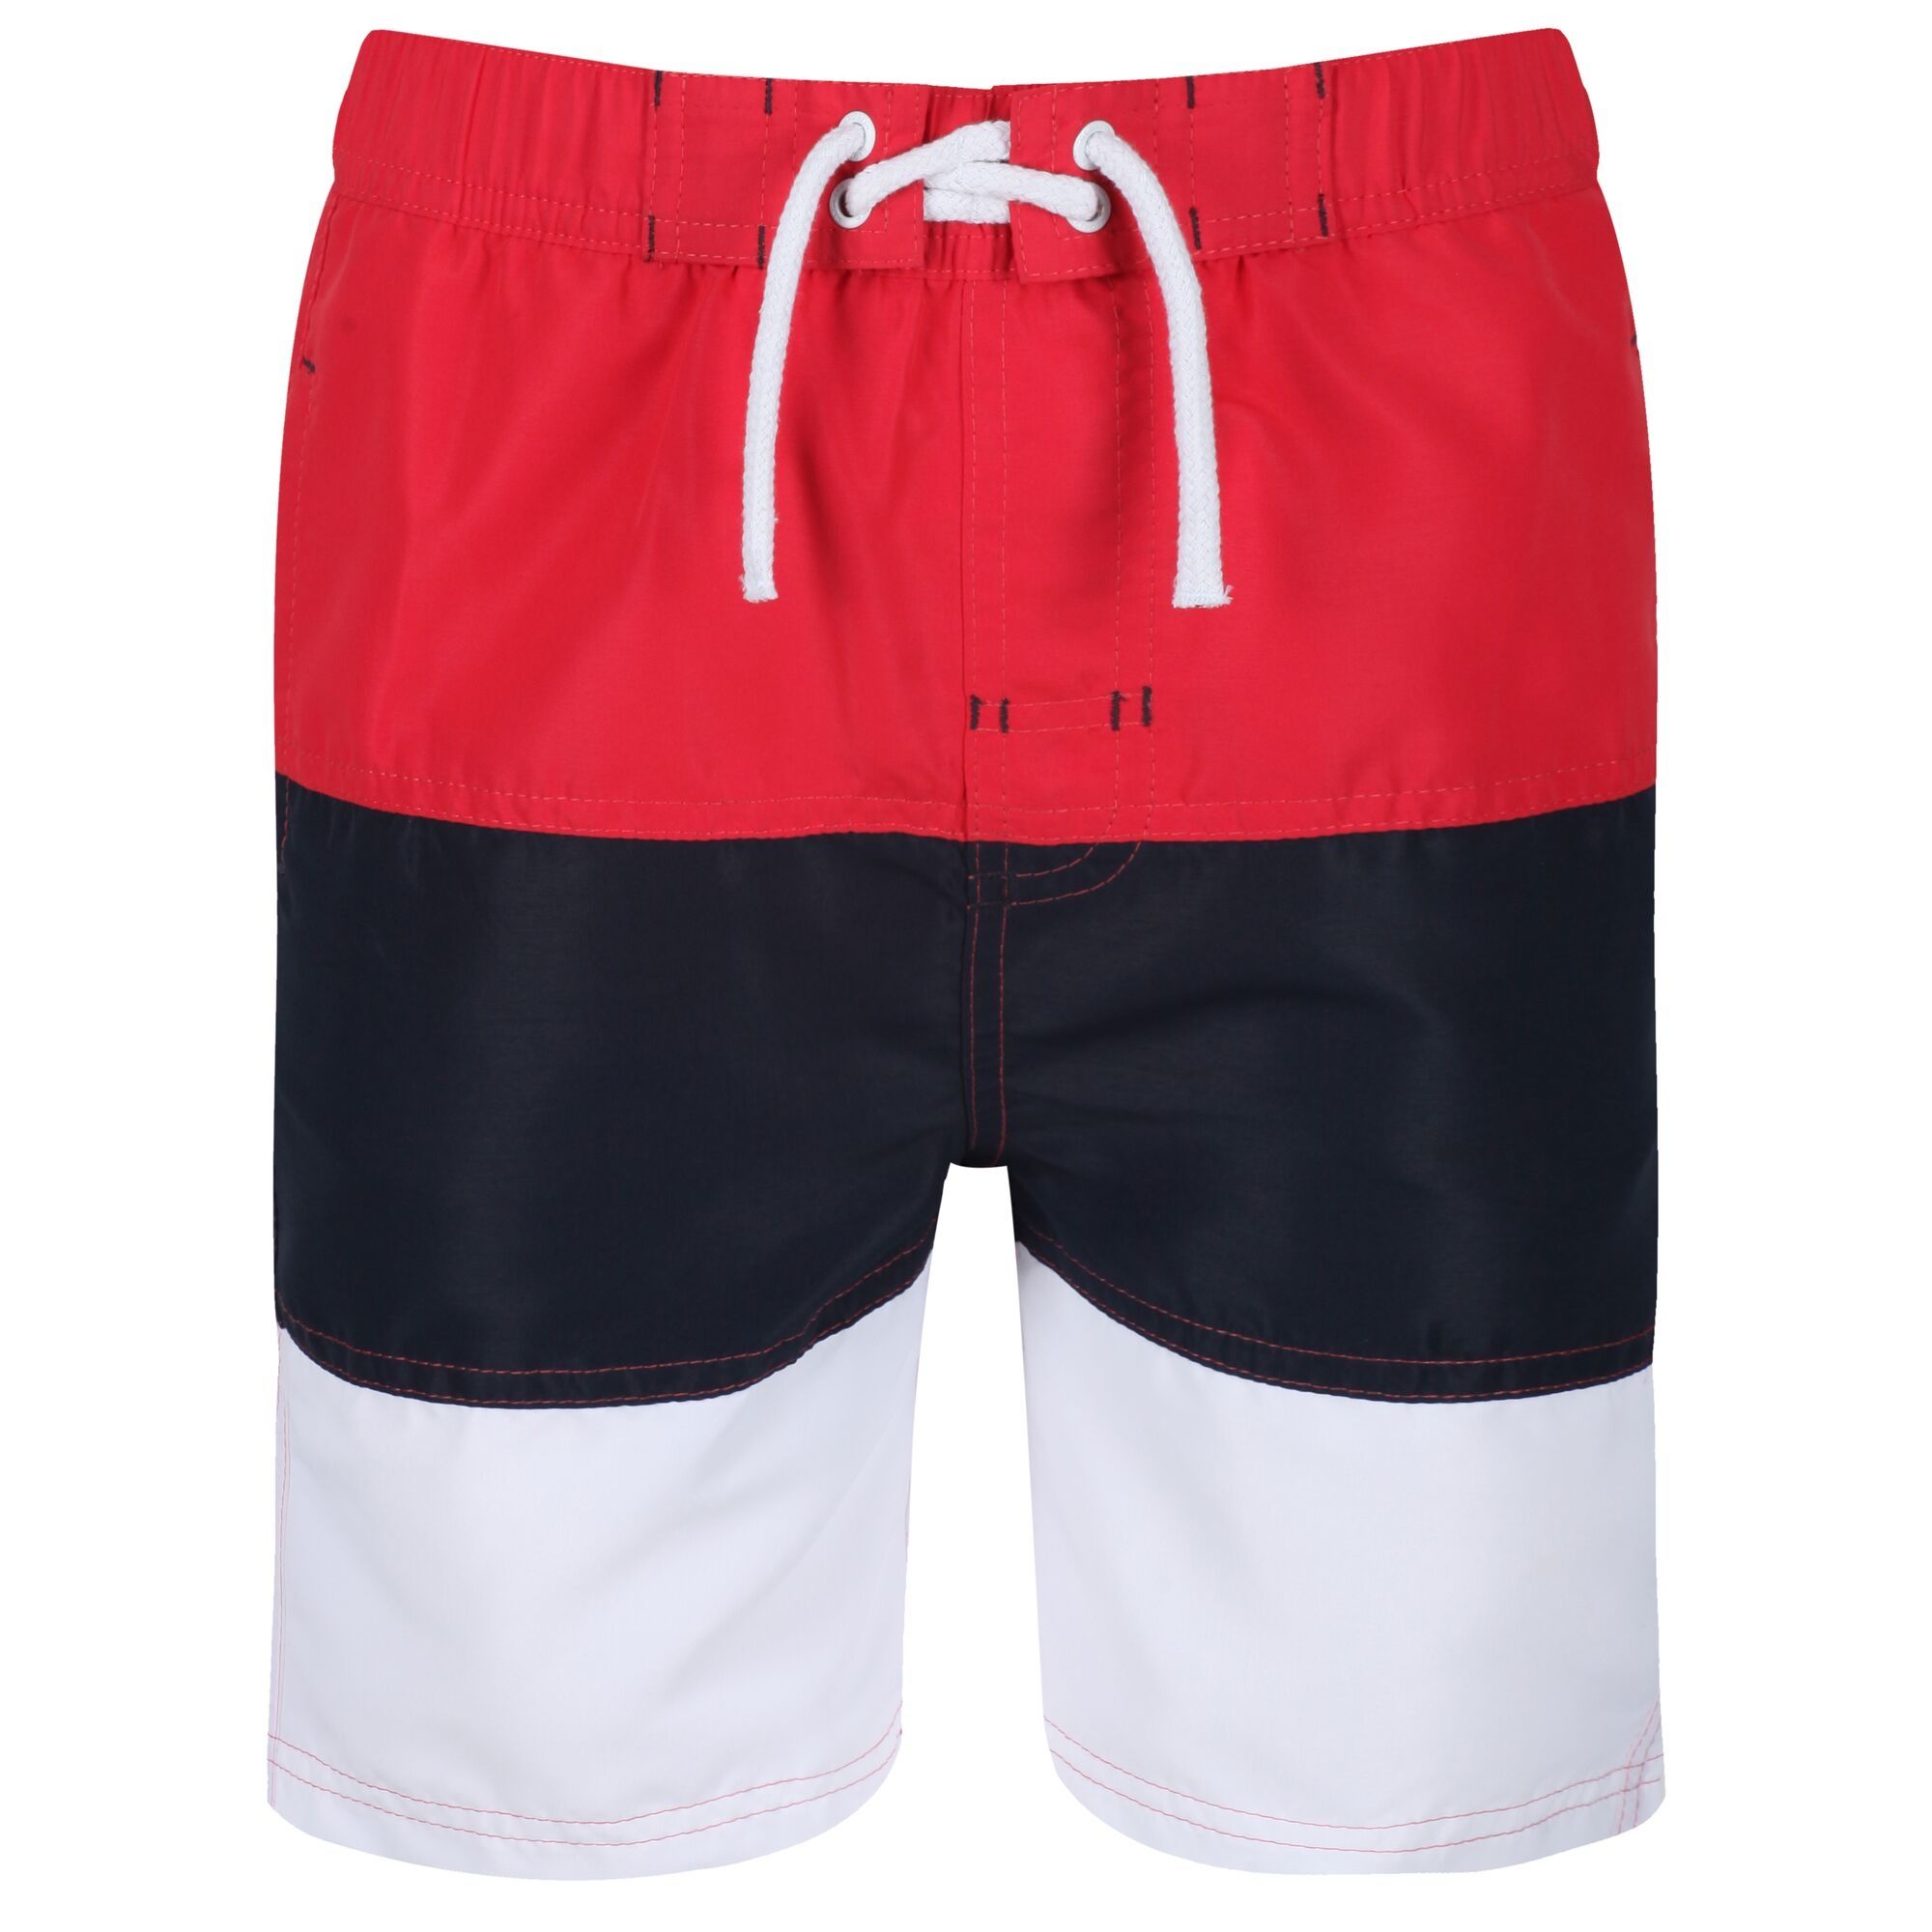 Material: 100% Polyester Taslan fabric. Hard-wearing, long-length board shorts with a elasticated waist and fixed drawcord detail. Quick drying fabric shorts with mesh brief liner. 2 side pockets and 1 back pocket.